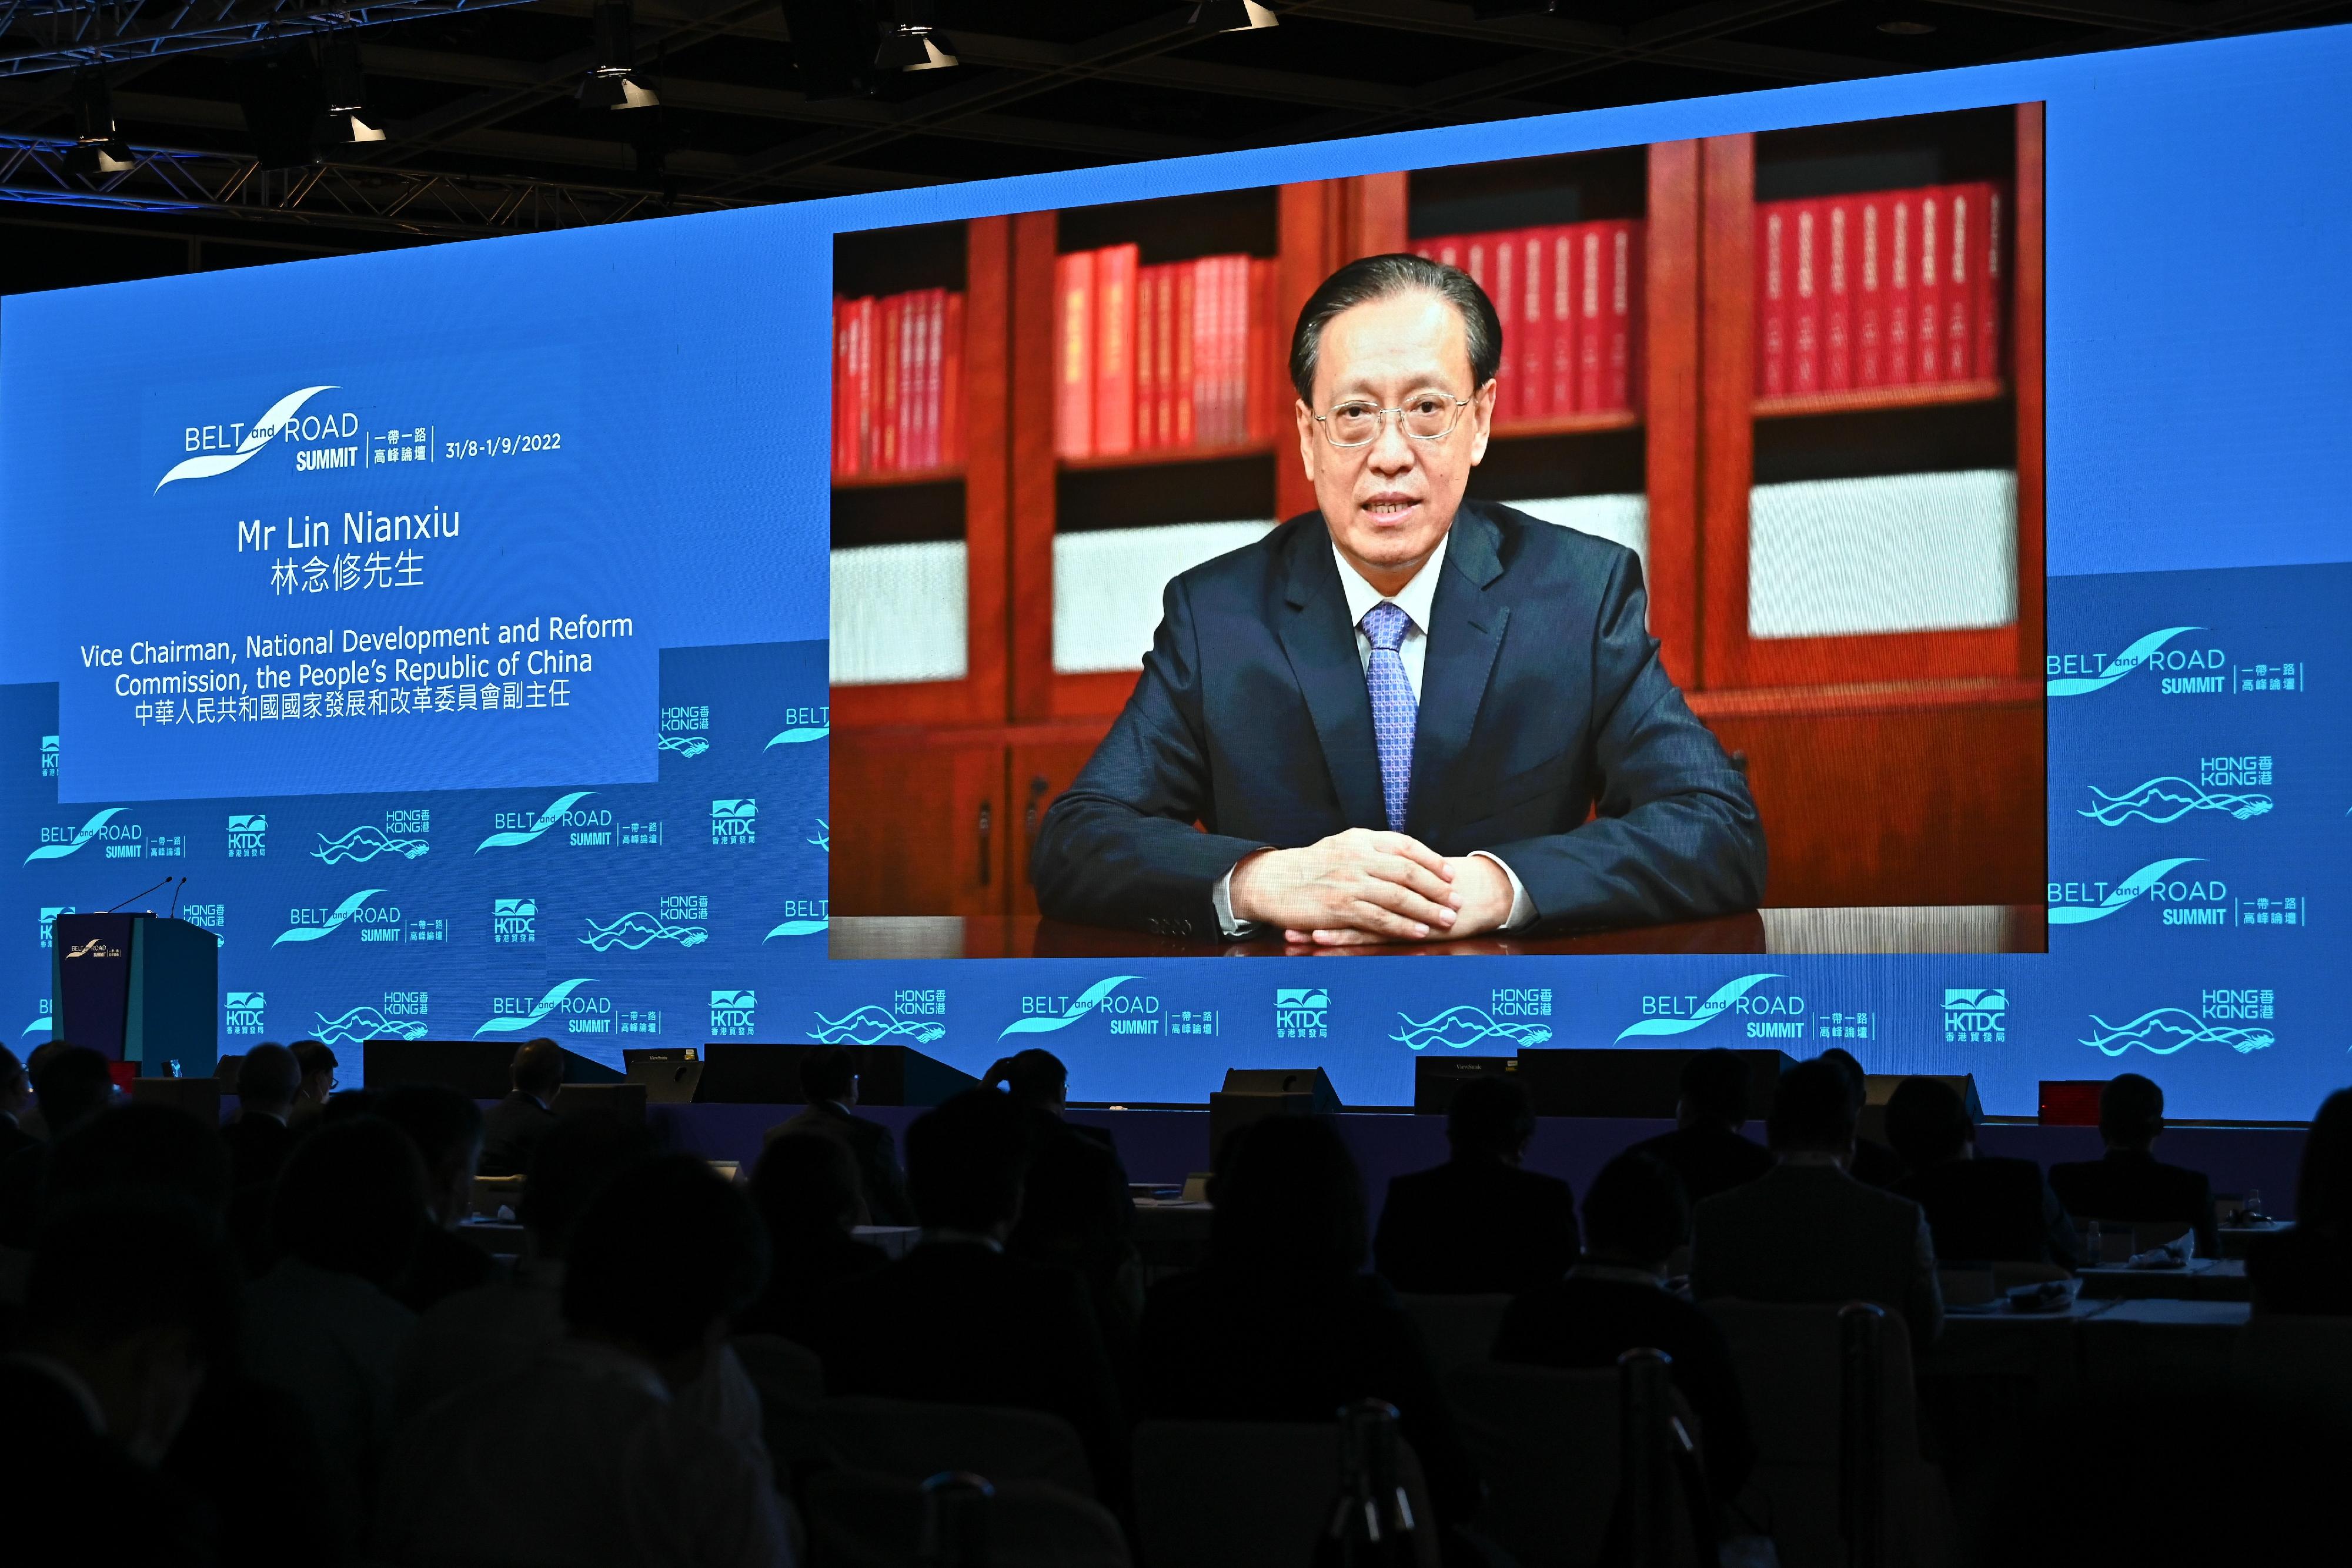 The seventh Belt and Road Summit opened today (August 31). Vice Chairman of the National Development and Reform Commission Mr Lin Nianxiu delivered a speech online at the opening session this morning.